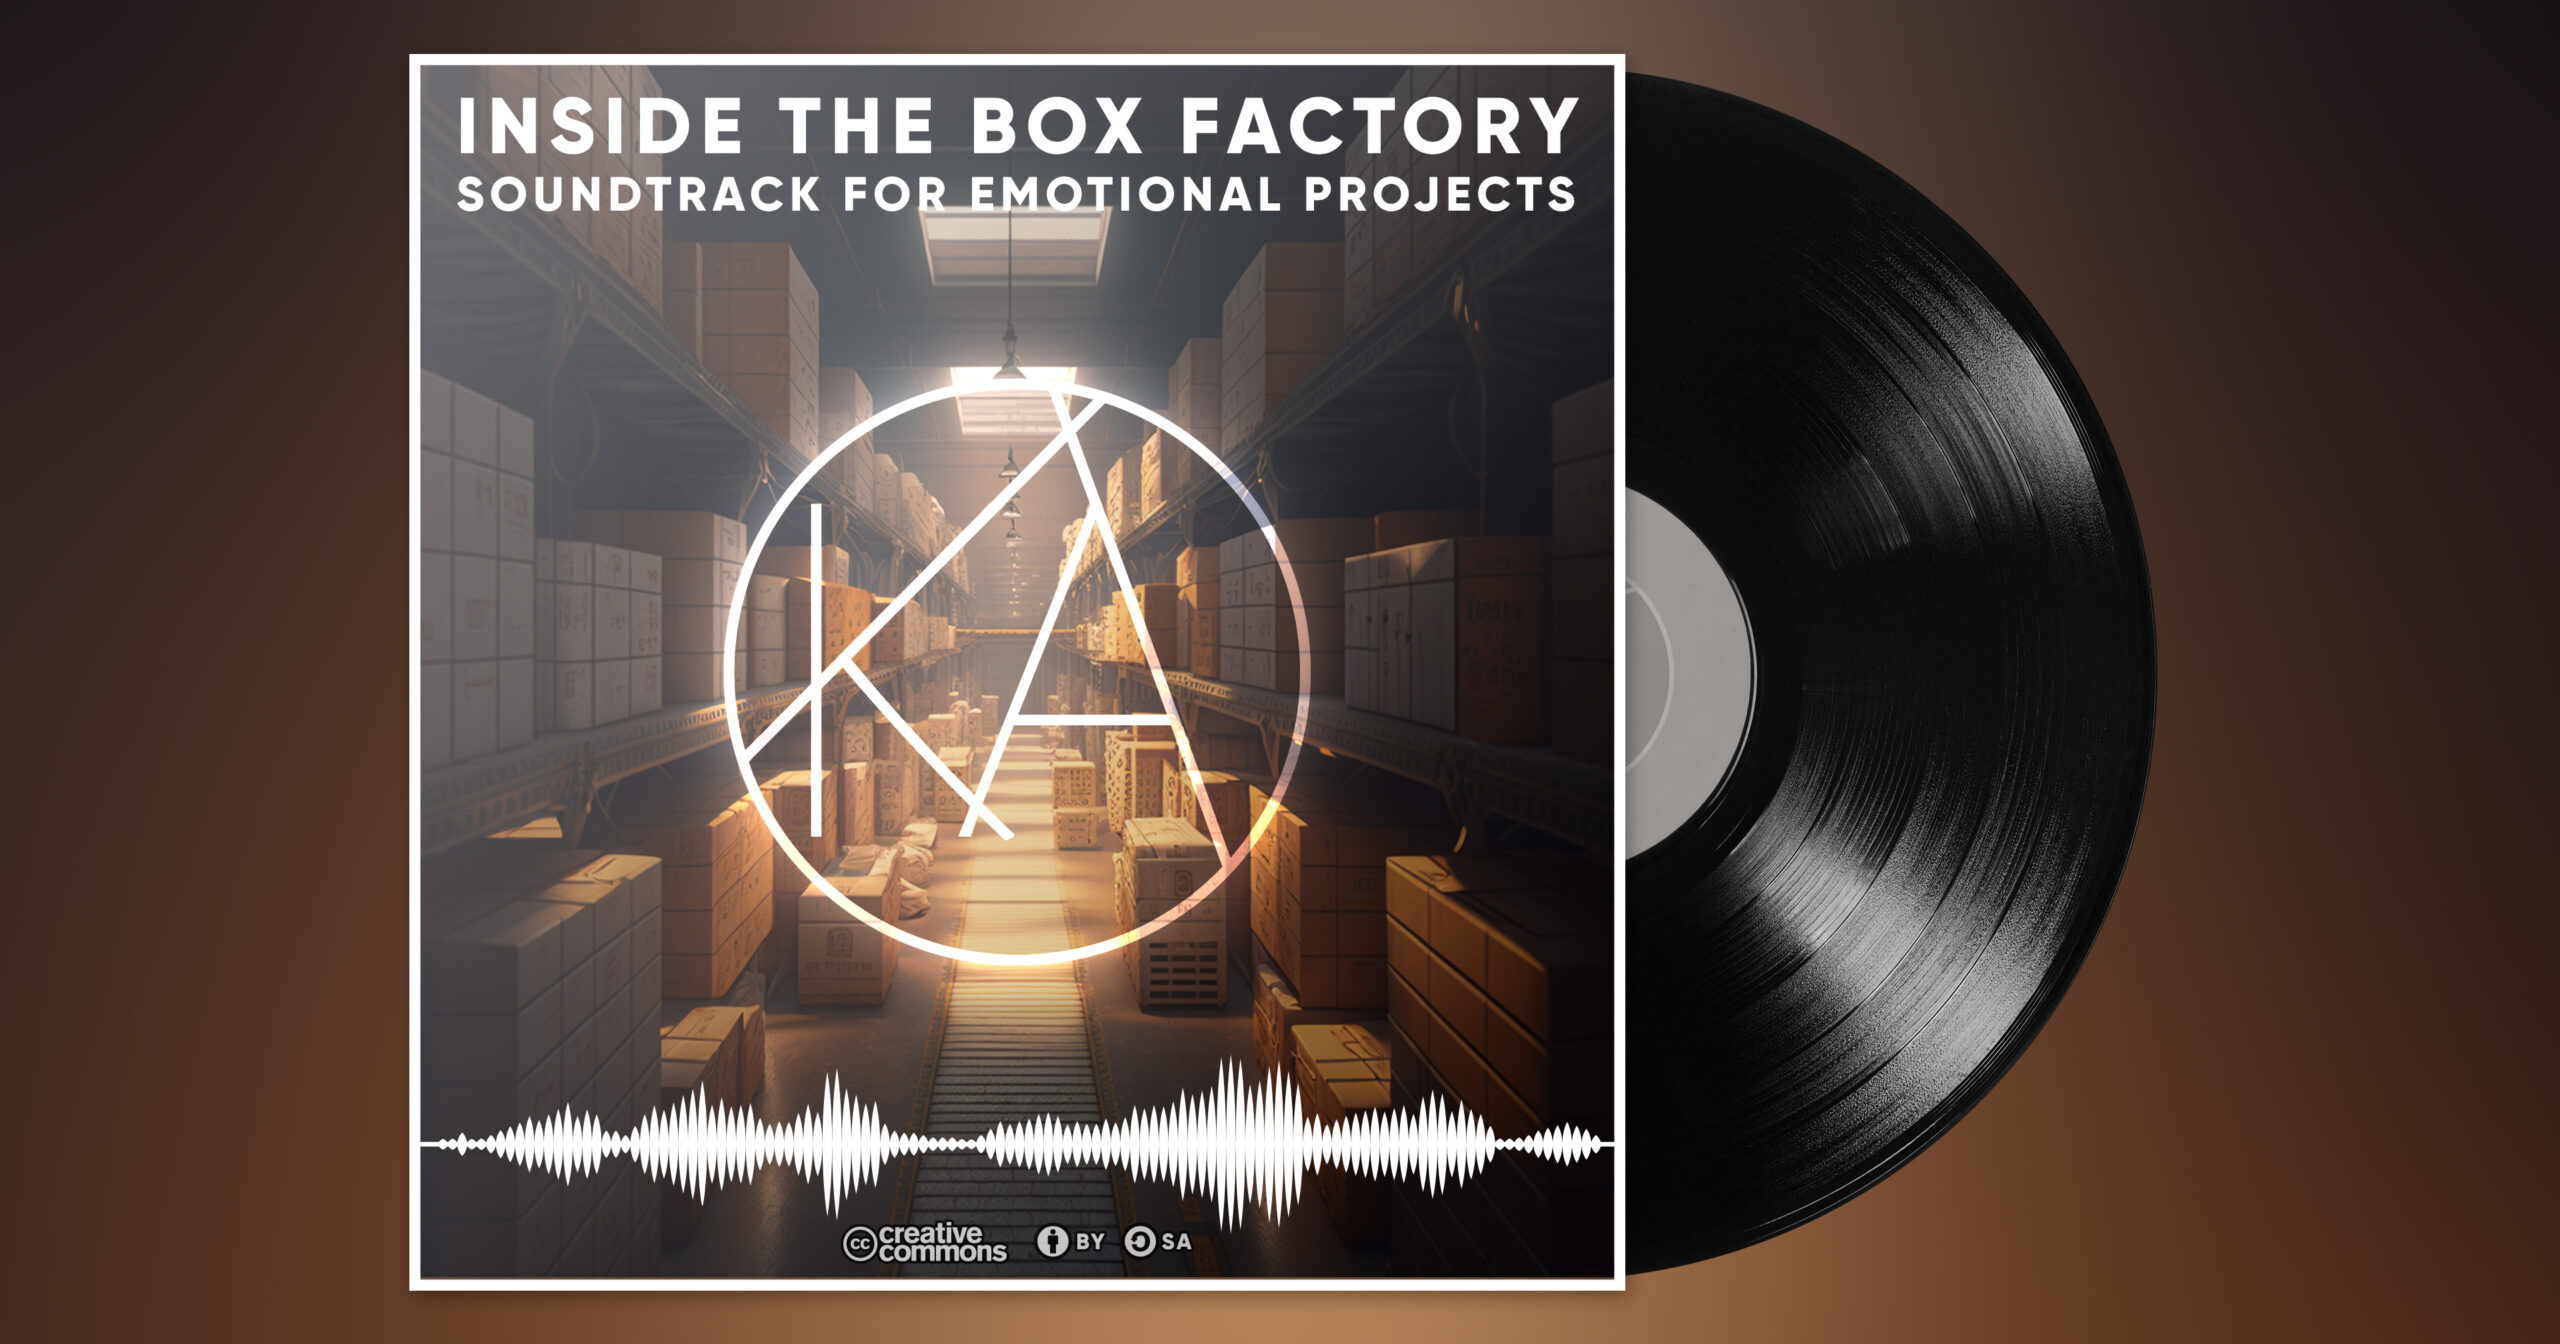 Inside the Box Factory will elevate your project to new heights and leave a lasting impression on your audience.